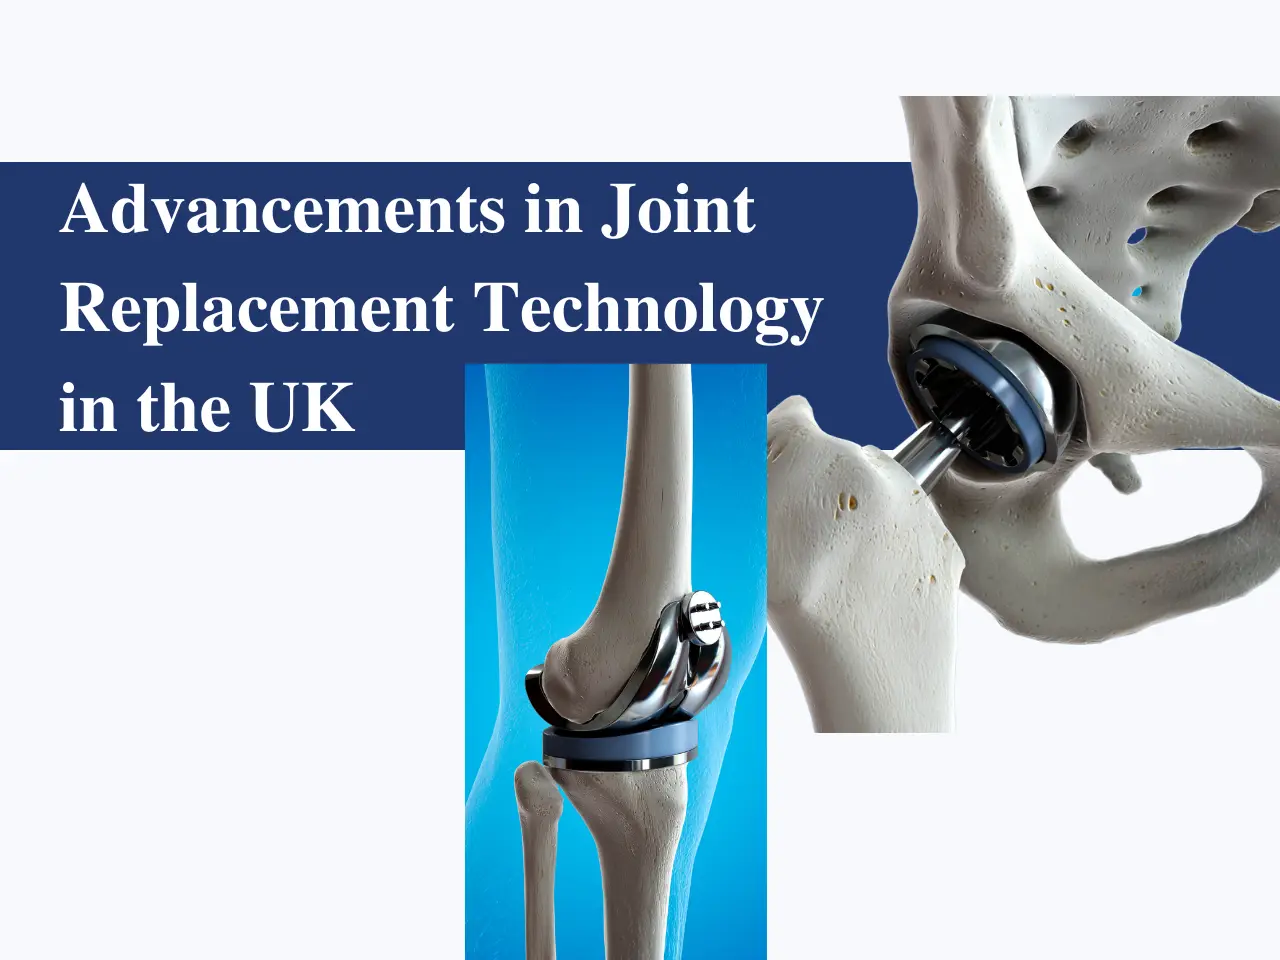 Advancements in Joint Replacement